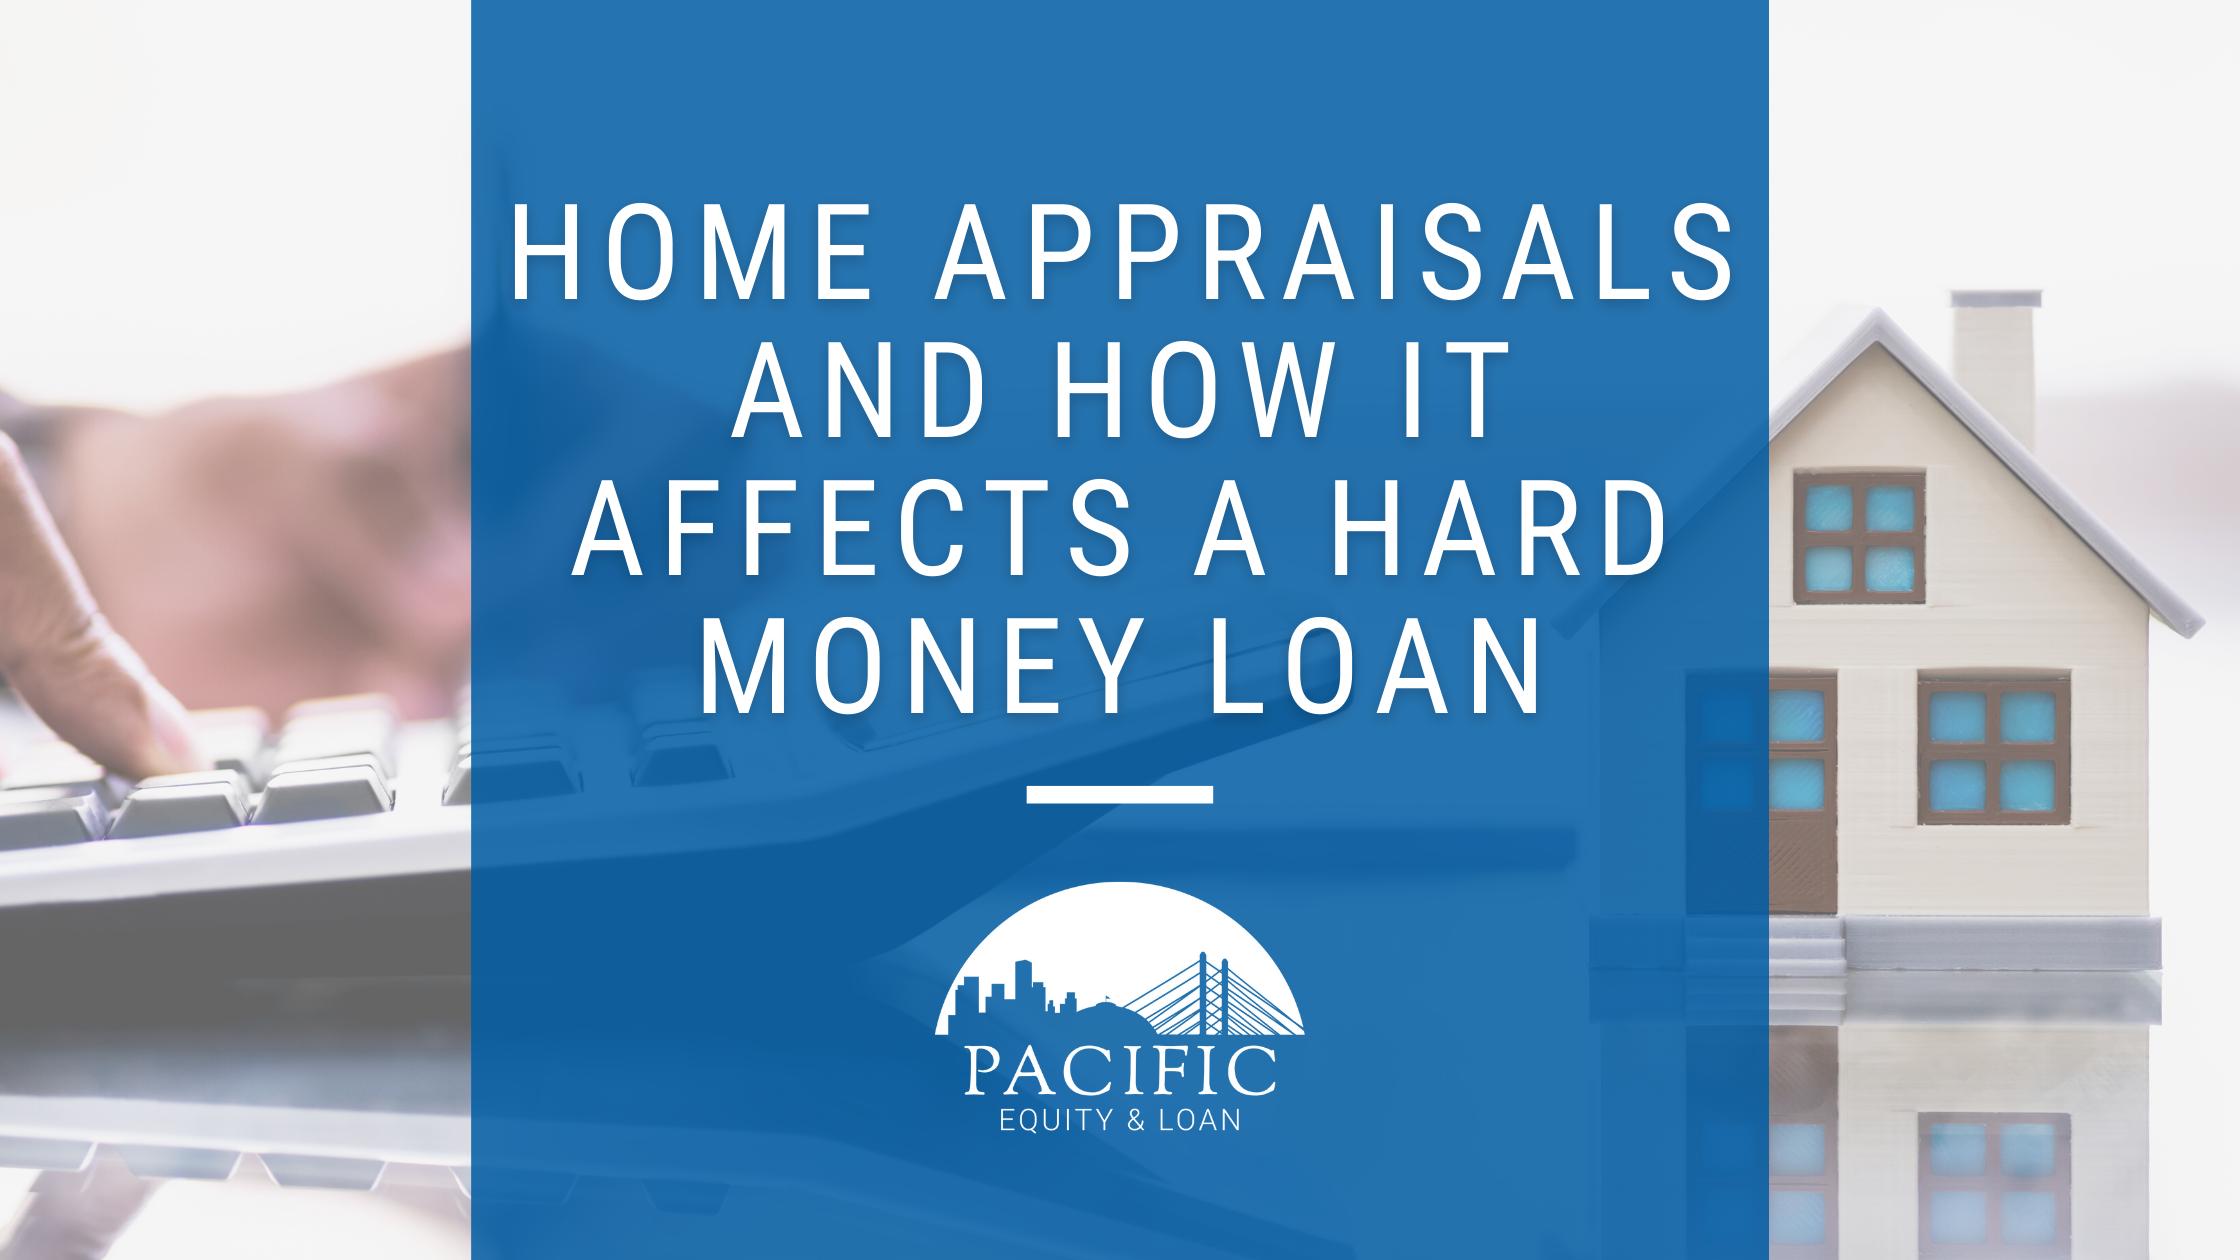 Home Appraisals and How It Affects A Hard Money Loan